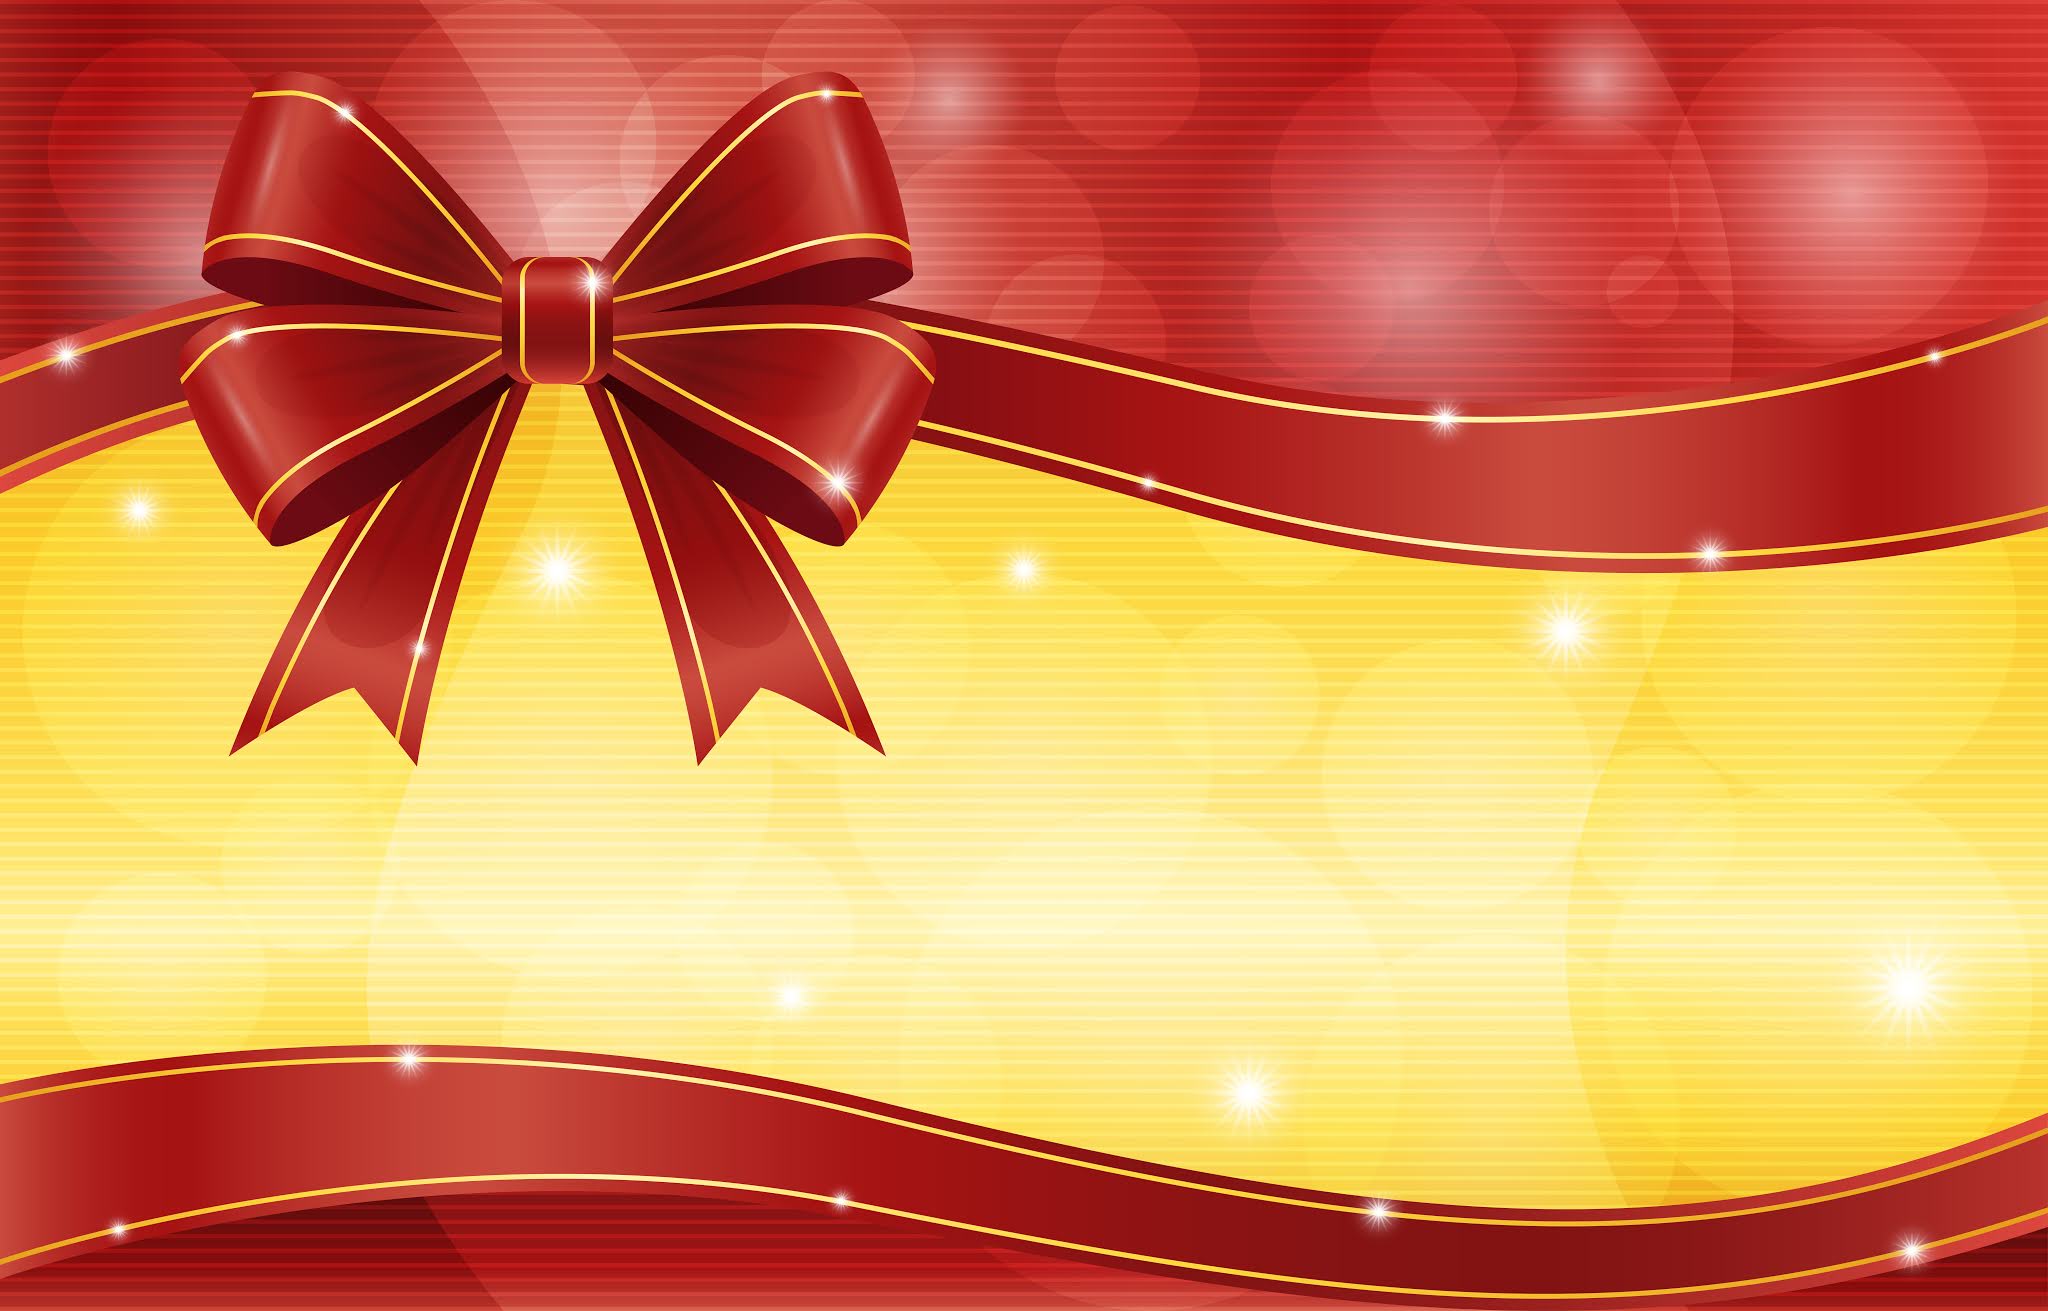 red-ribbon-bow-with-glowing-gold-and-red-background